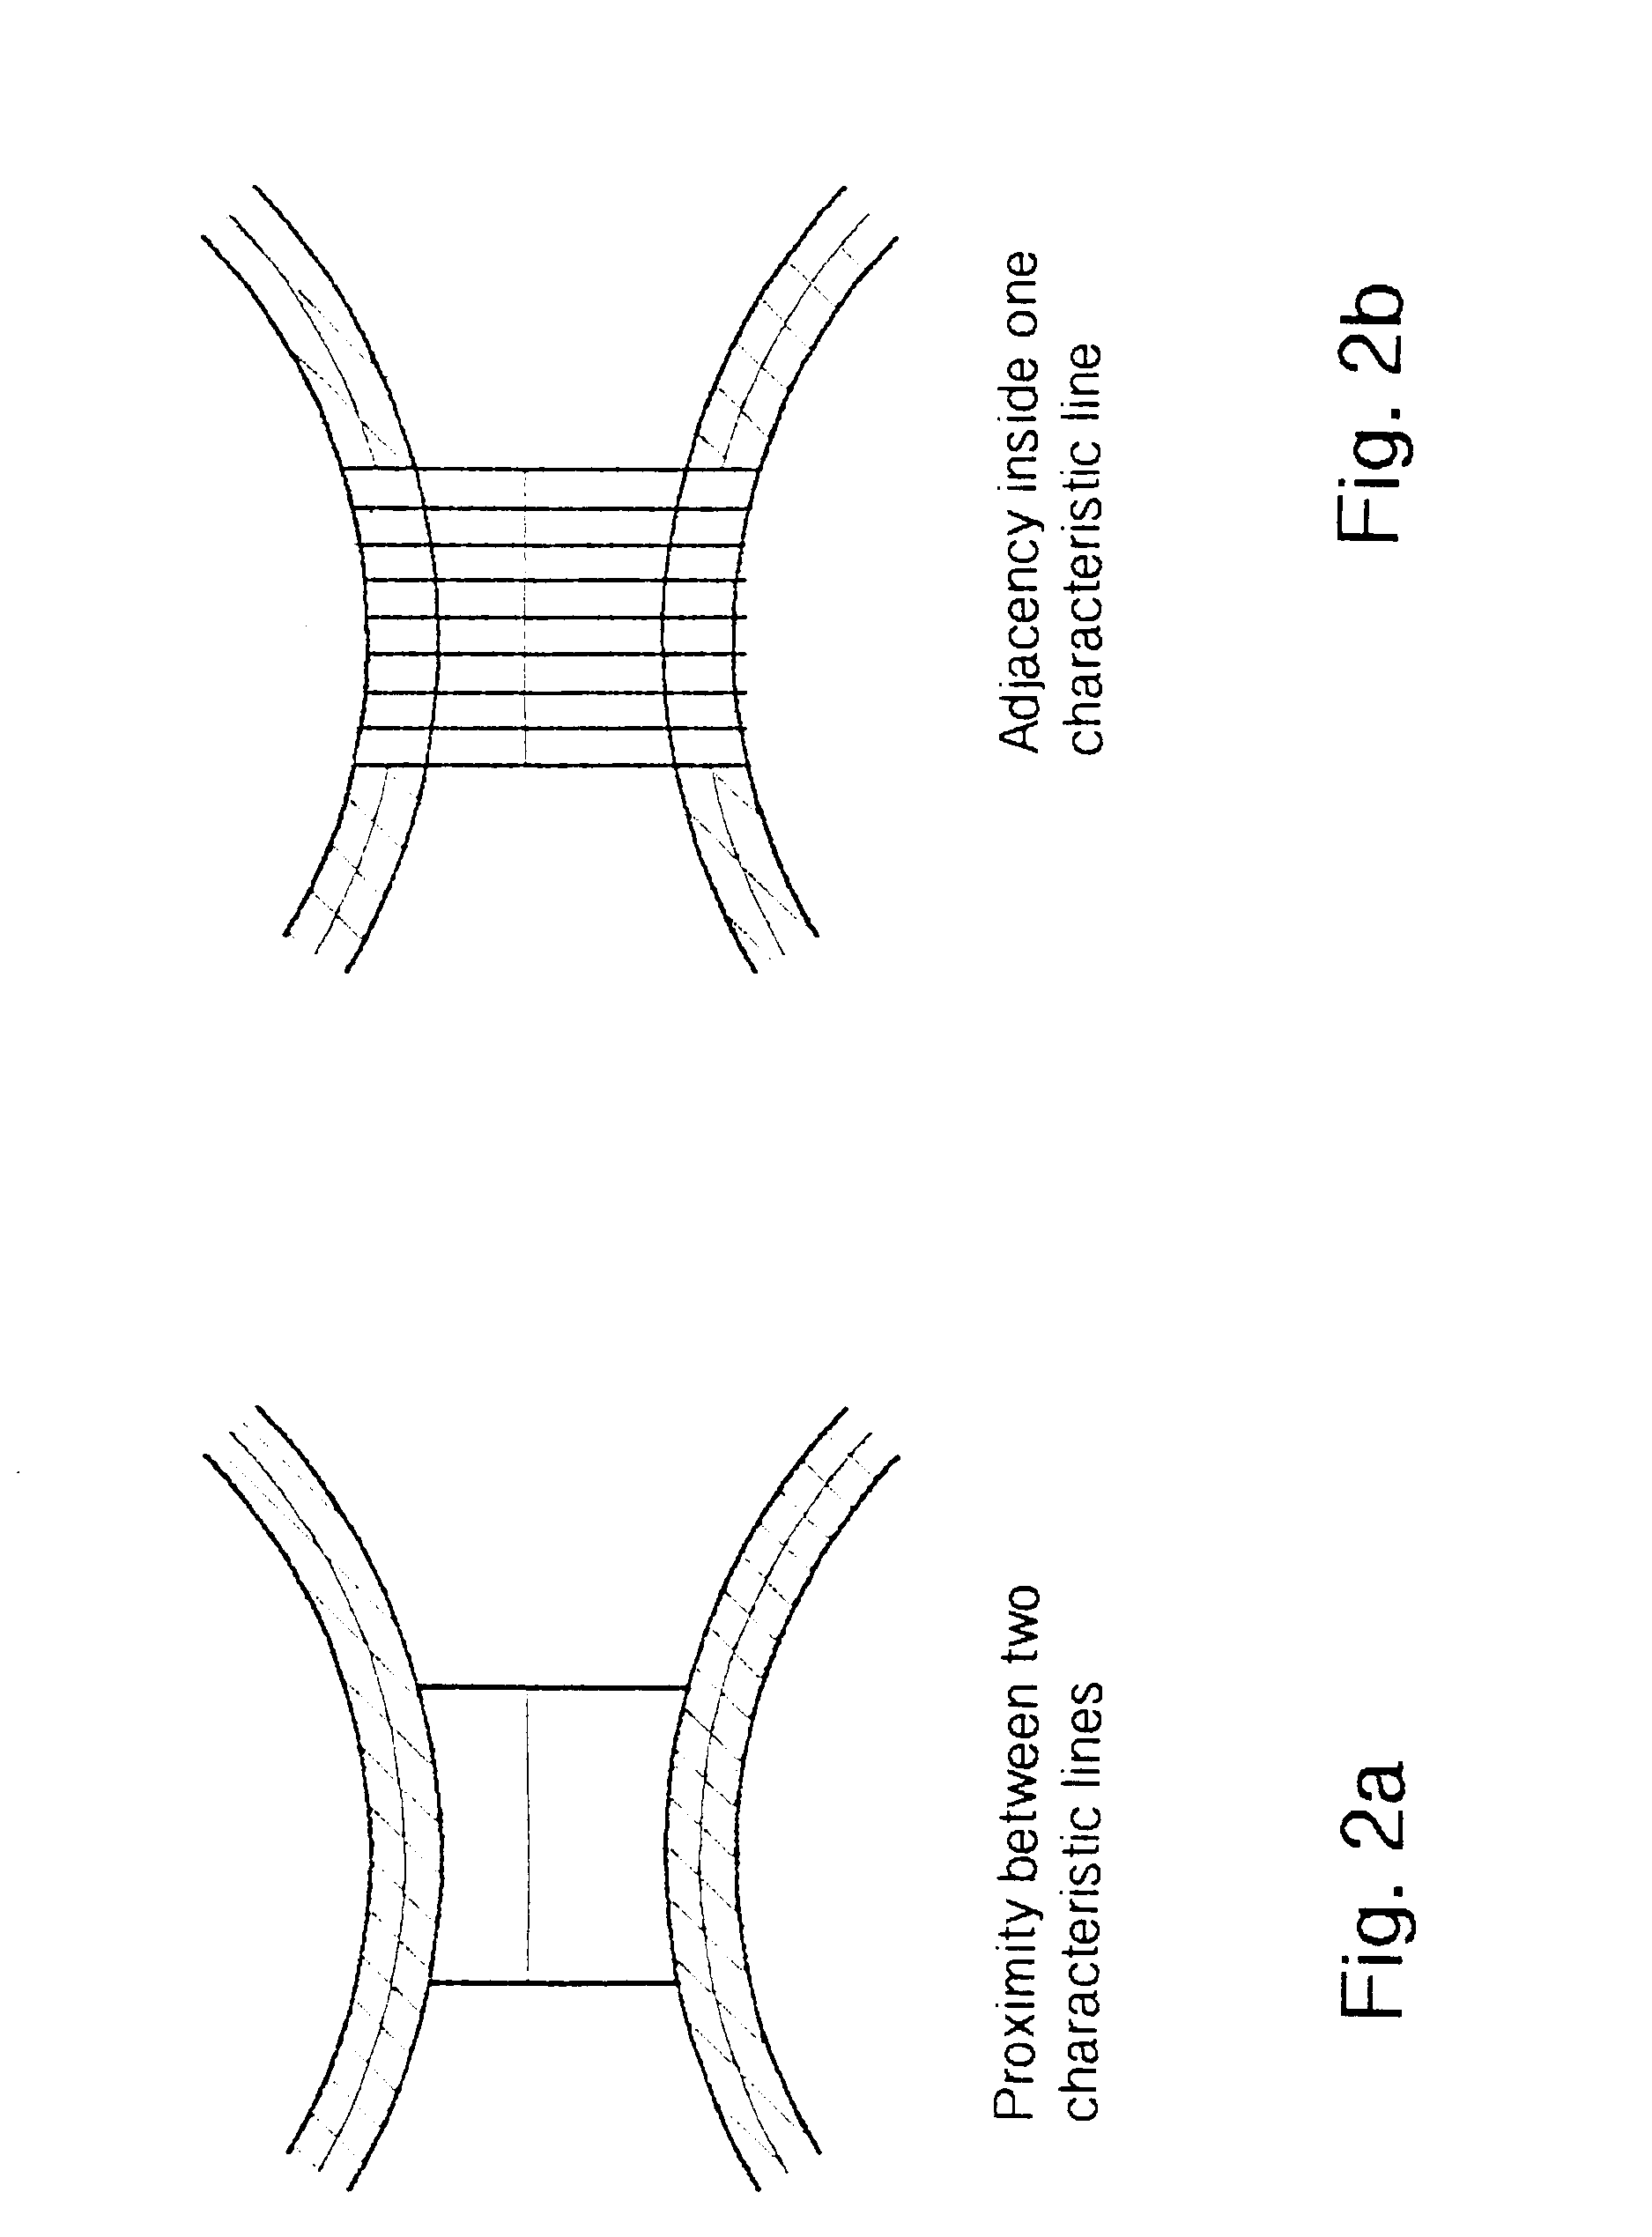 Method and apparatus for image representation by geometric and brightness modeling